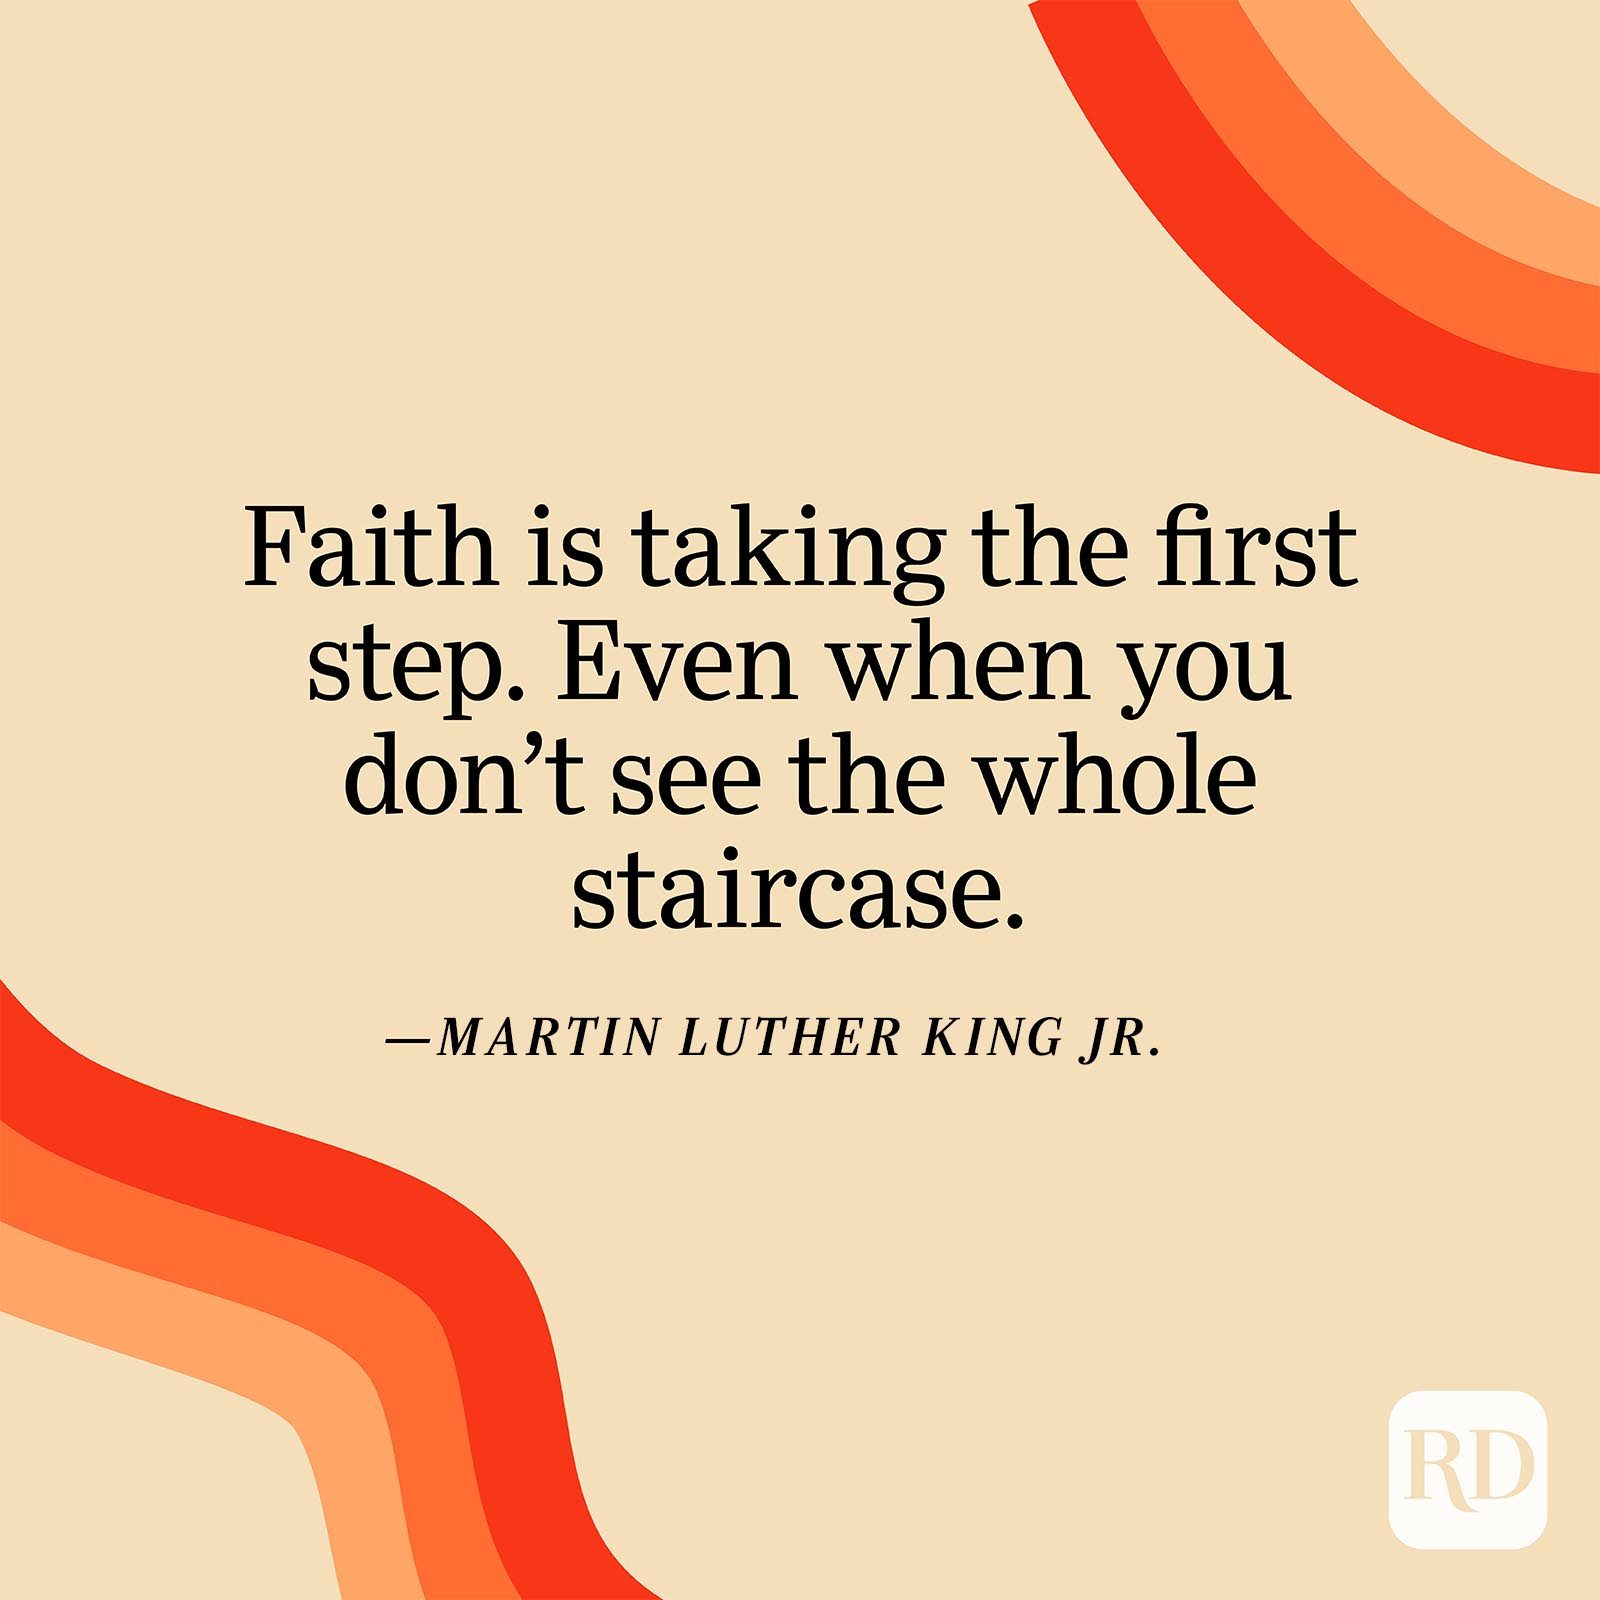 "Faith is taking the first step. Even when you don't see the whole staircase." —Martin Luther King Jr.